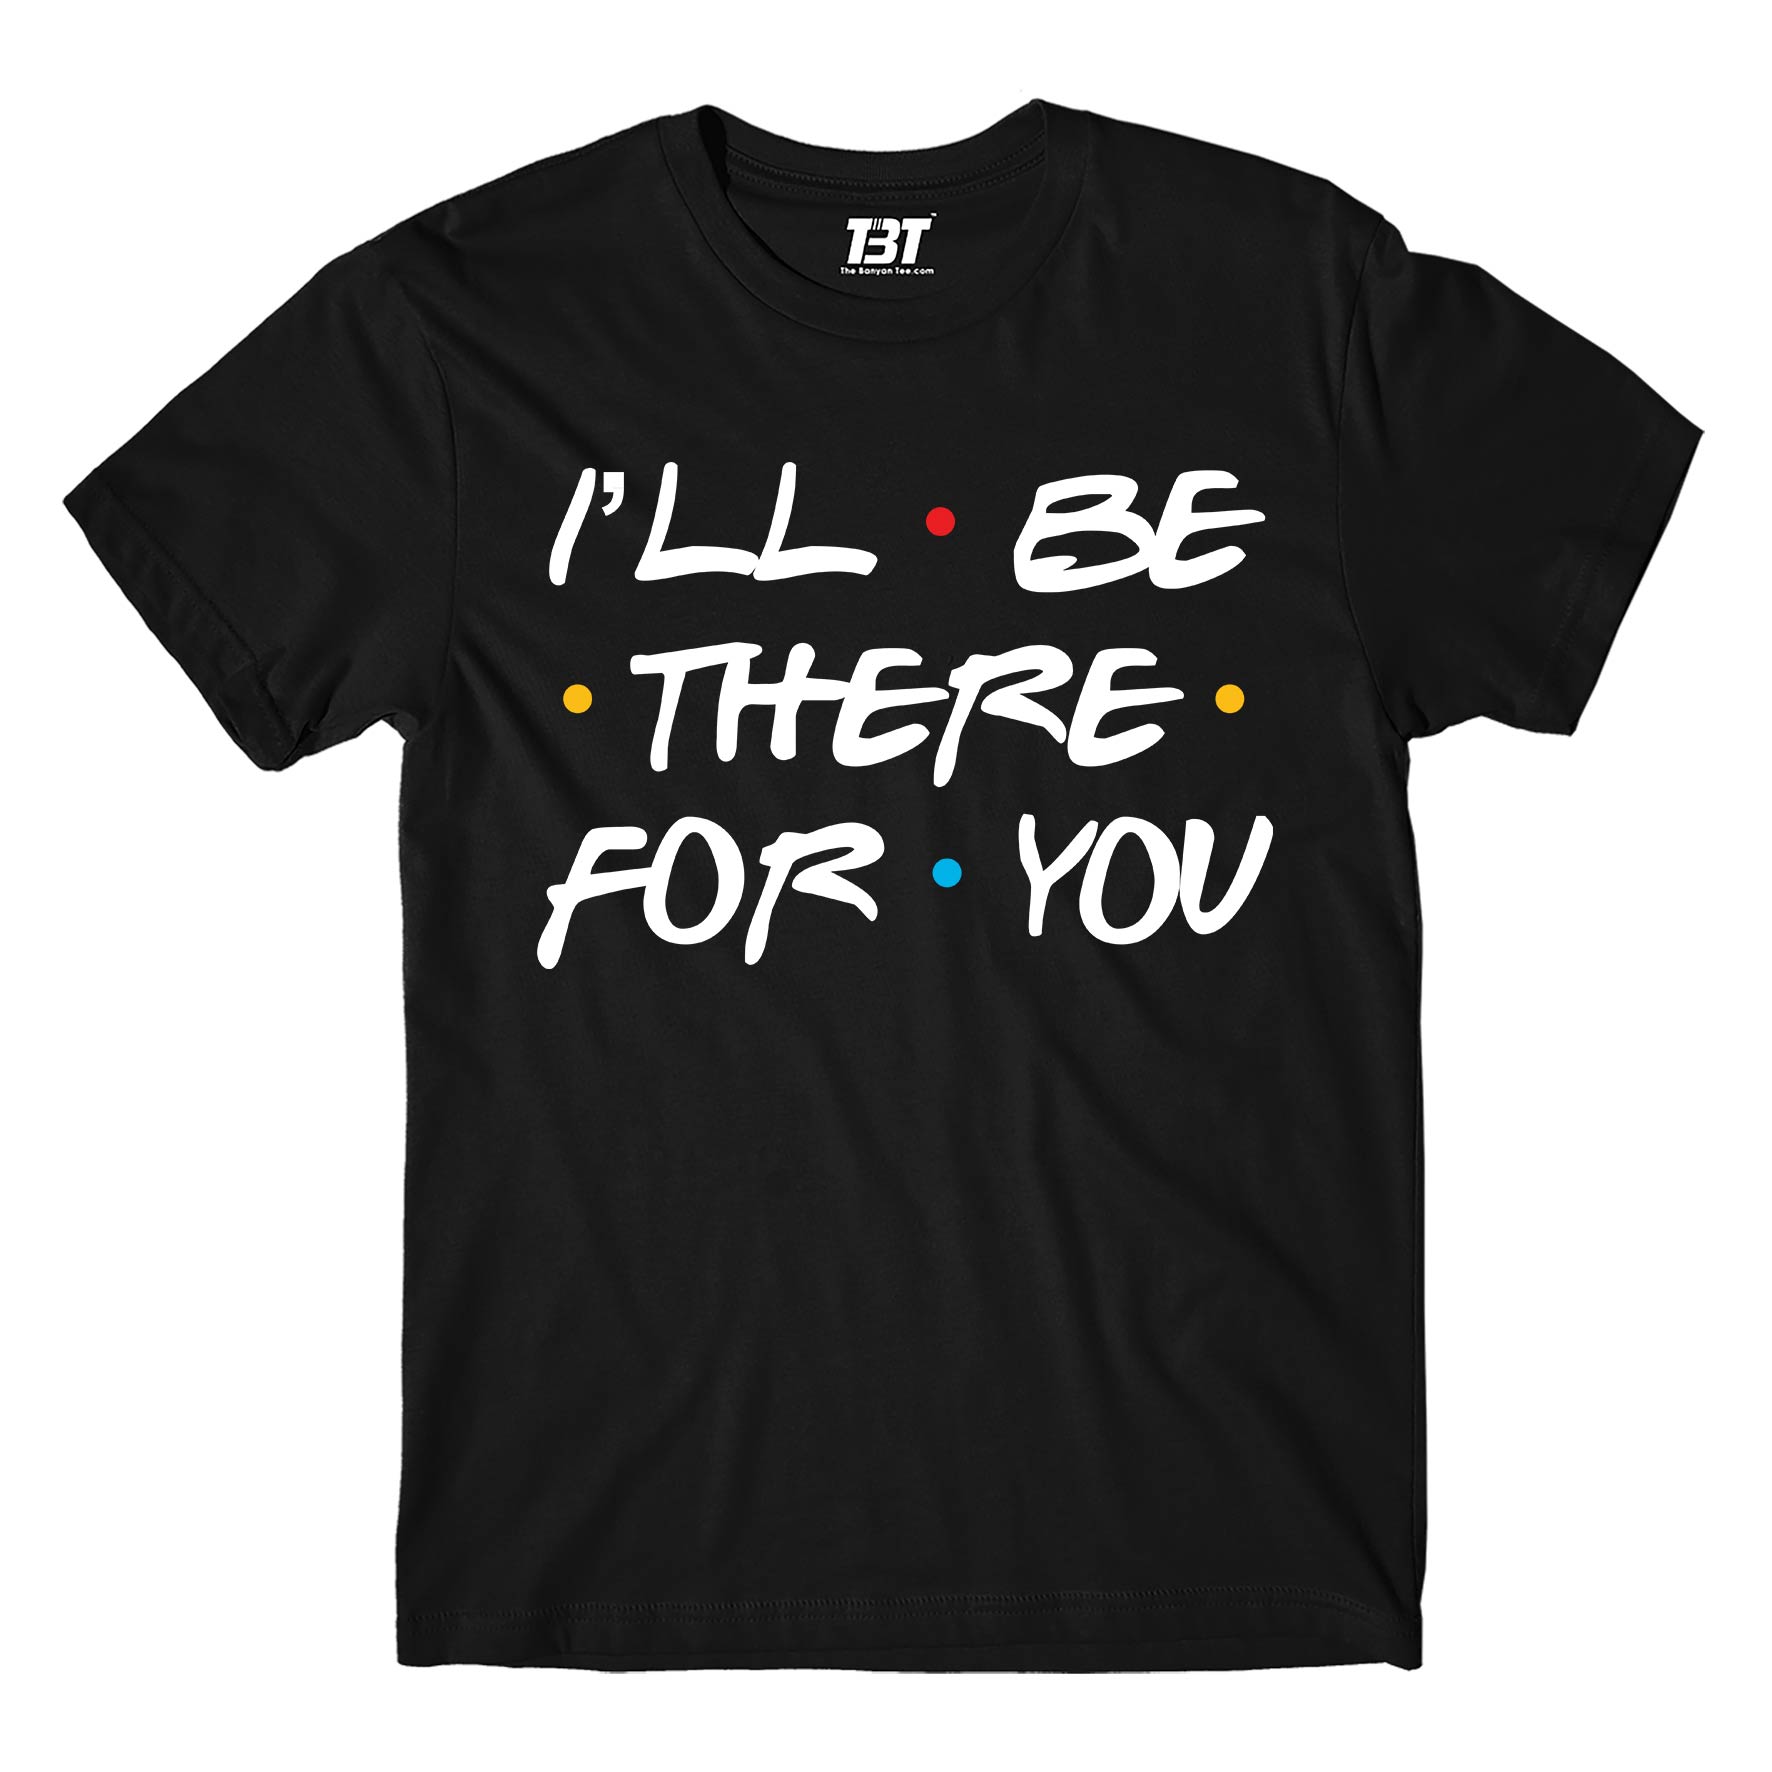 Friends T-shirt - I'll Be There For You by The Banyan Tee TBT